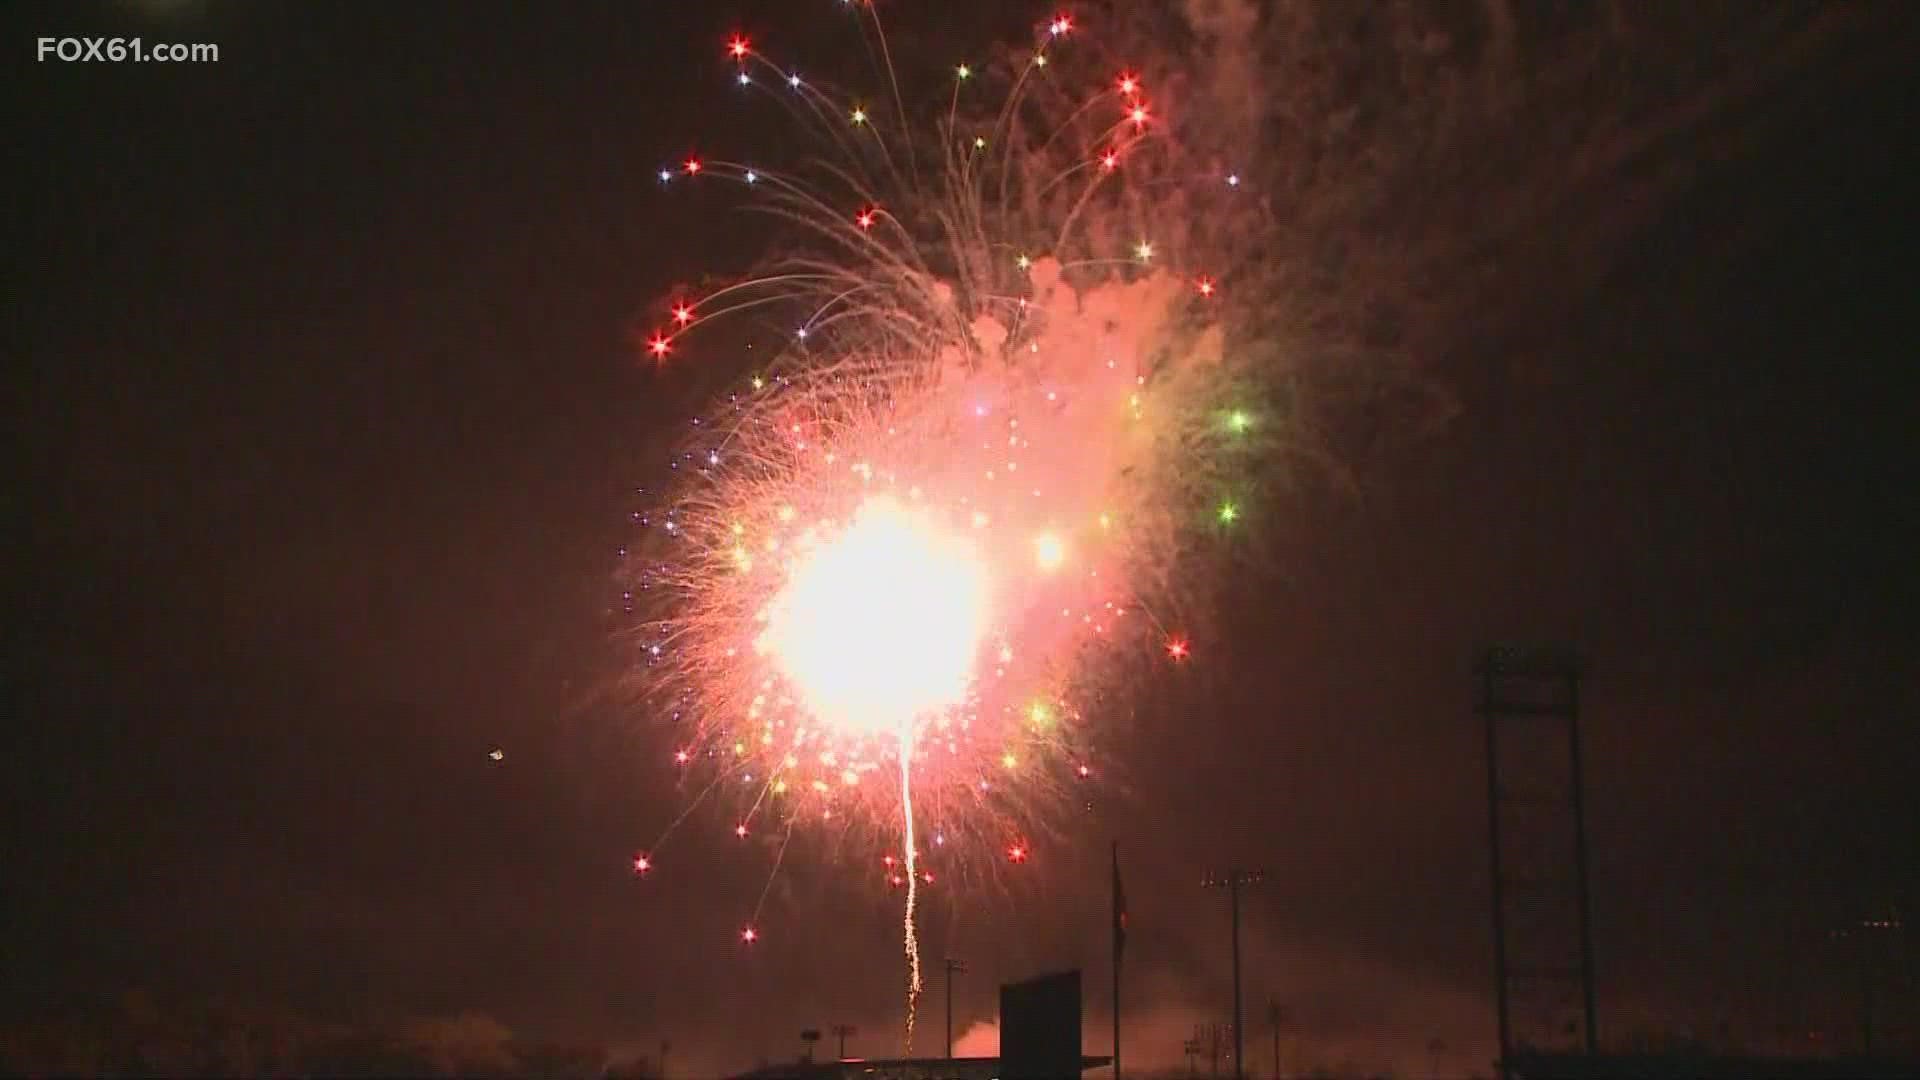 Families flocked to Willow Brook Park Monday night for New Britain's Great American Boom firework show.